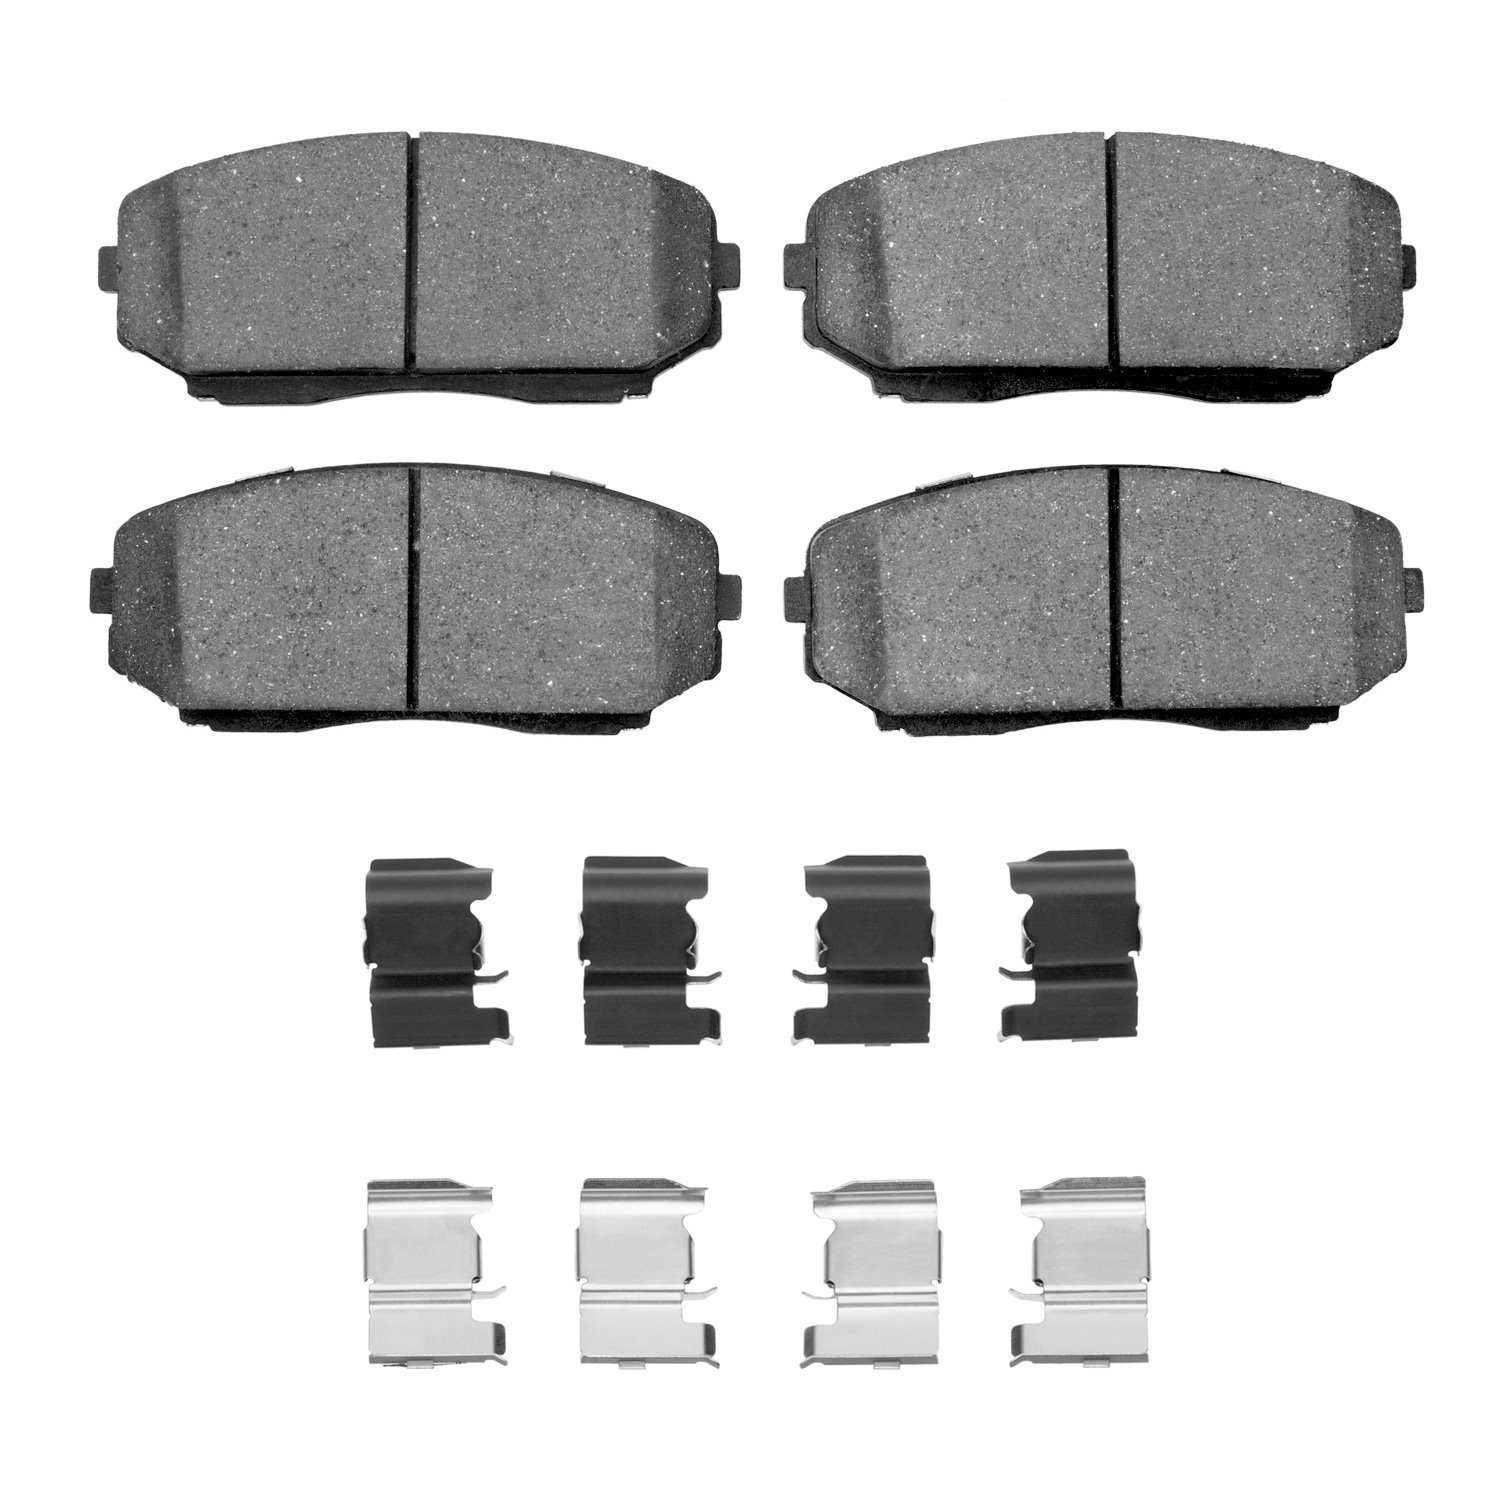 1552-1258-01 5000 Advanced Ceramic Brake Pads & Hardware Kit, Fits Select Ford/Lincoln/Mercury/Mazda, Position: Front